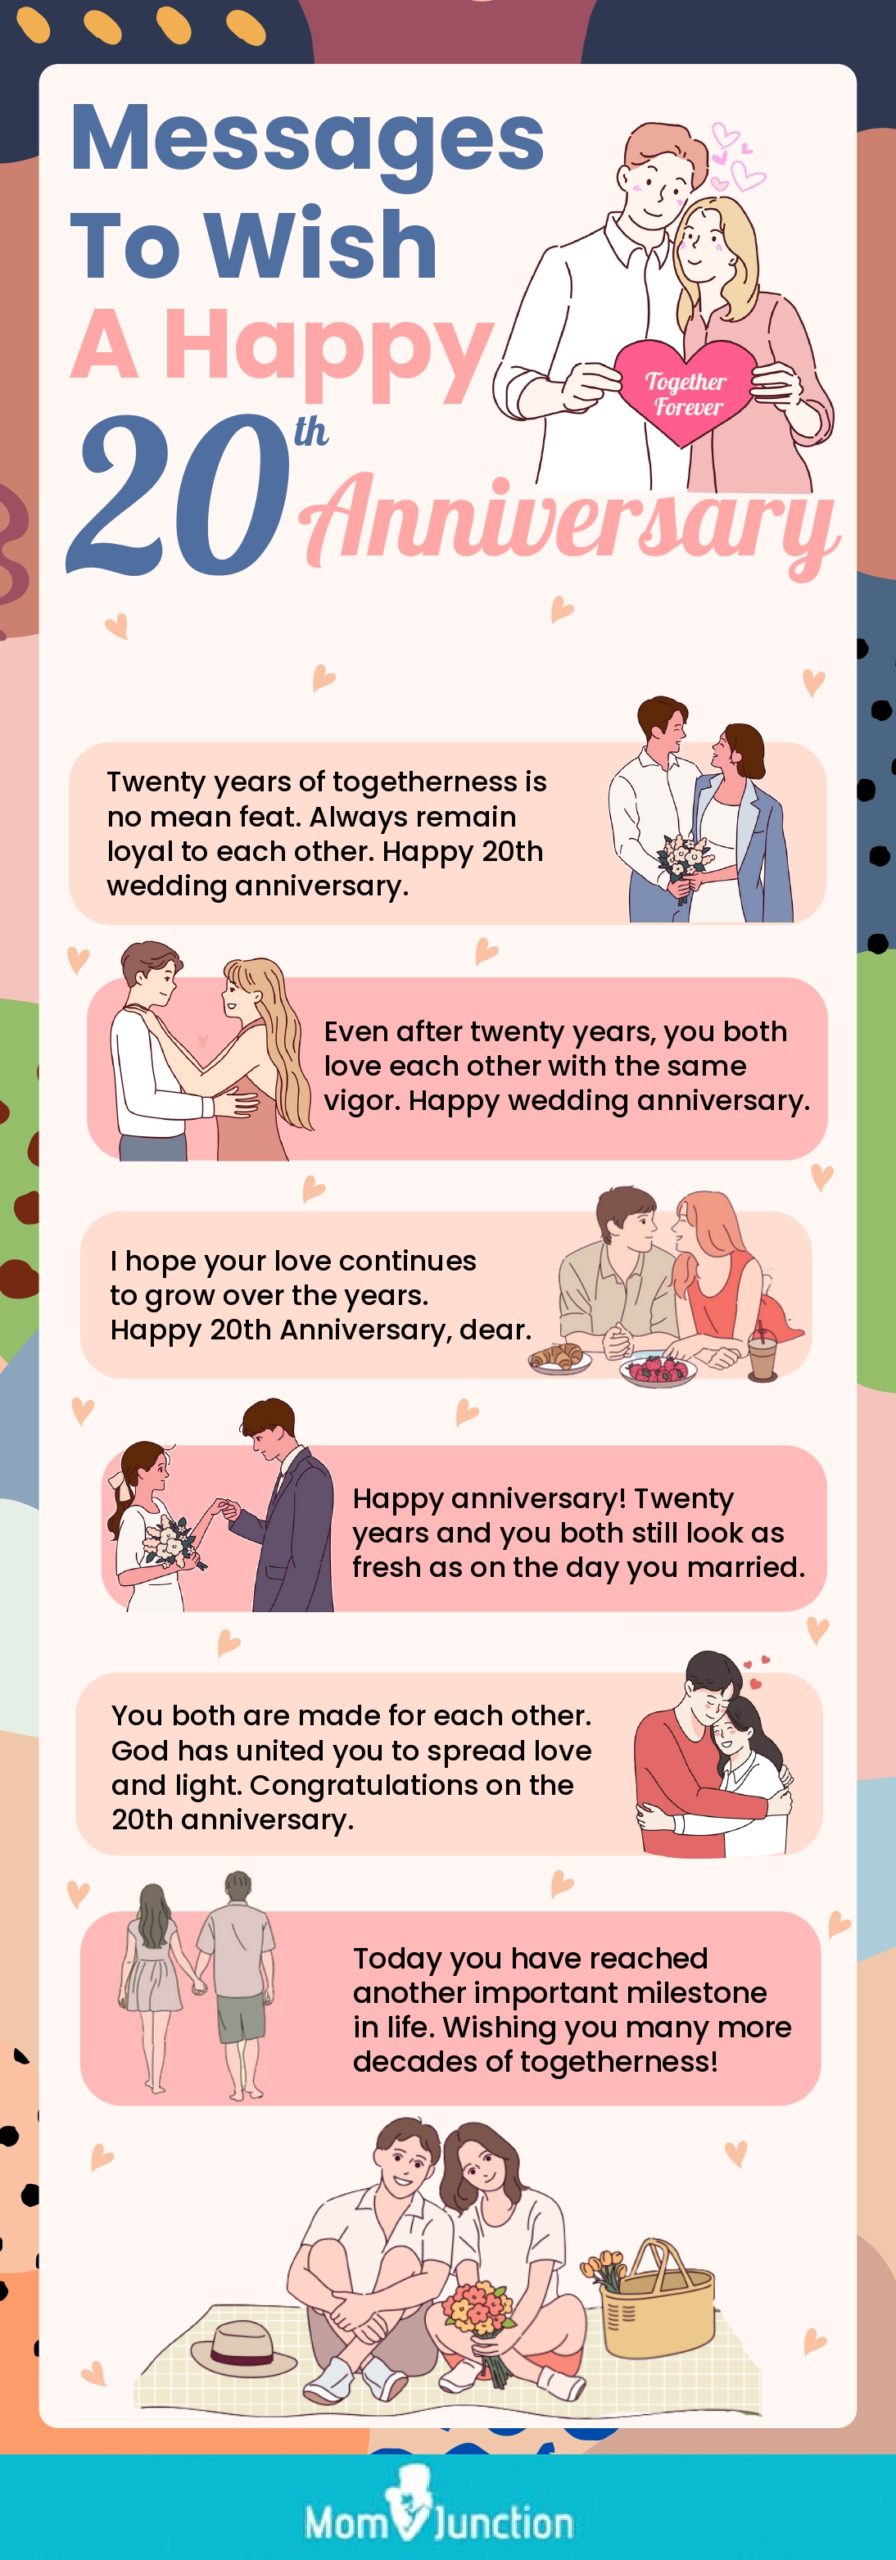 messages to wish a happy 20th anniversary (infographic)